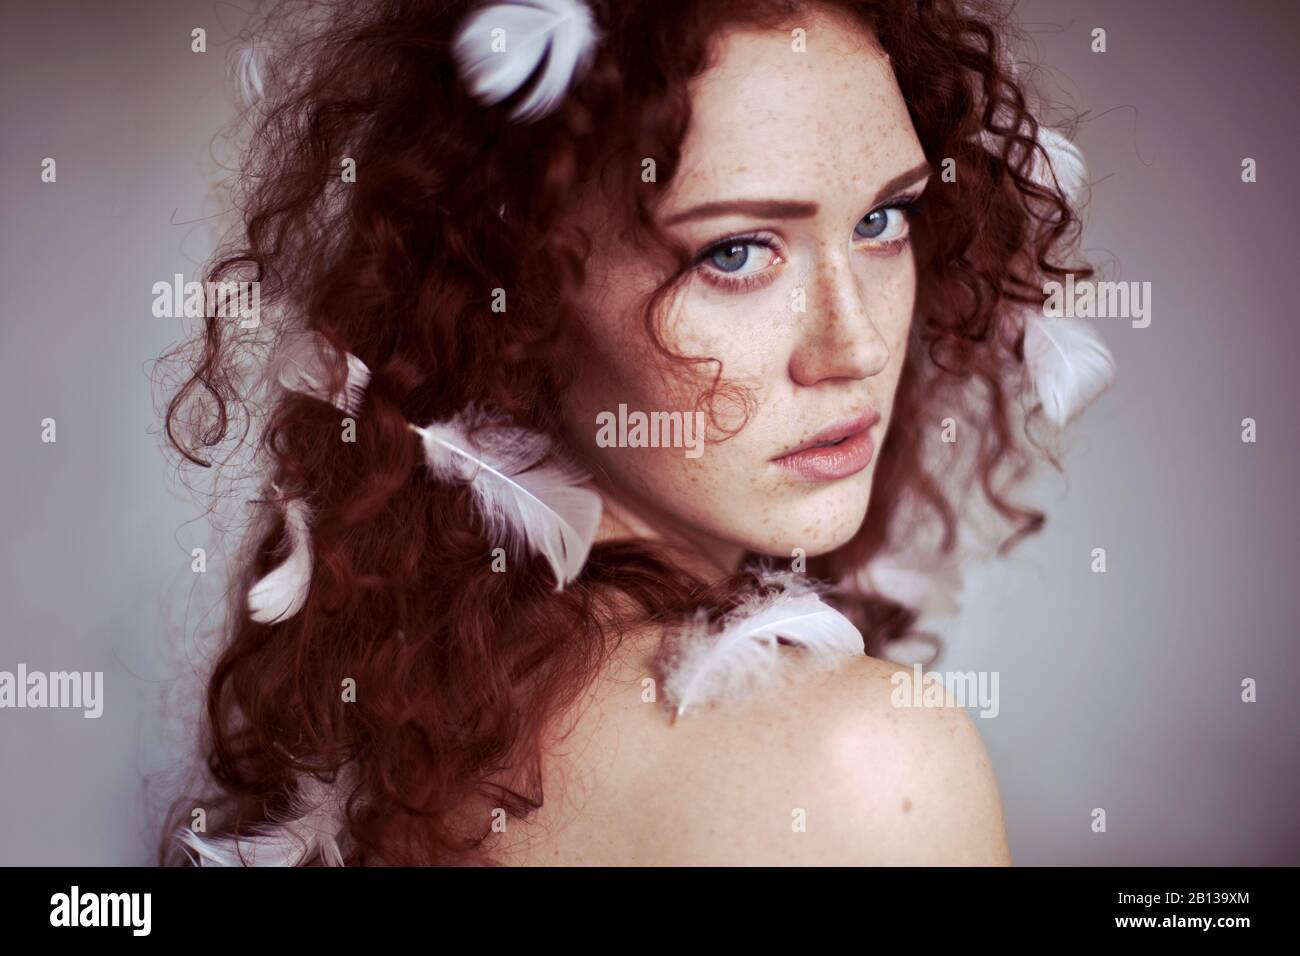 Young woman with feathers in her hair Stock Photo